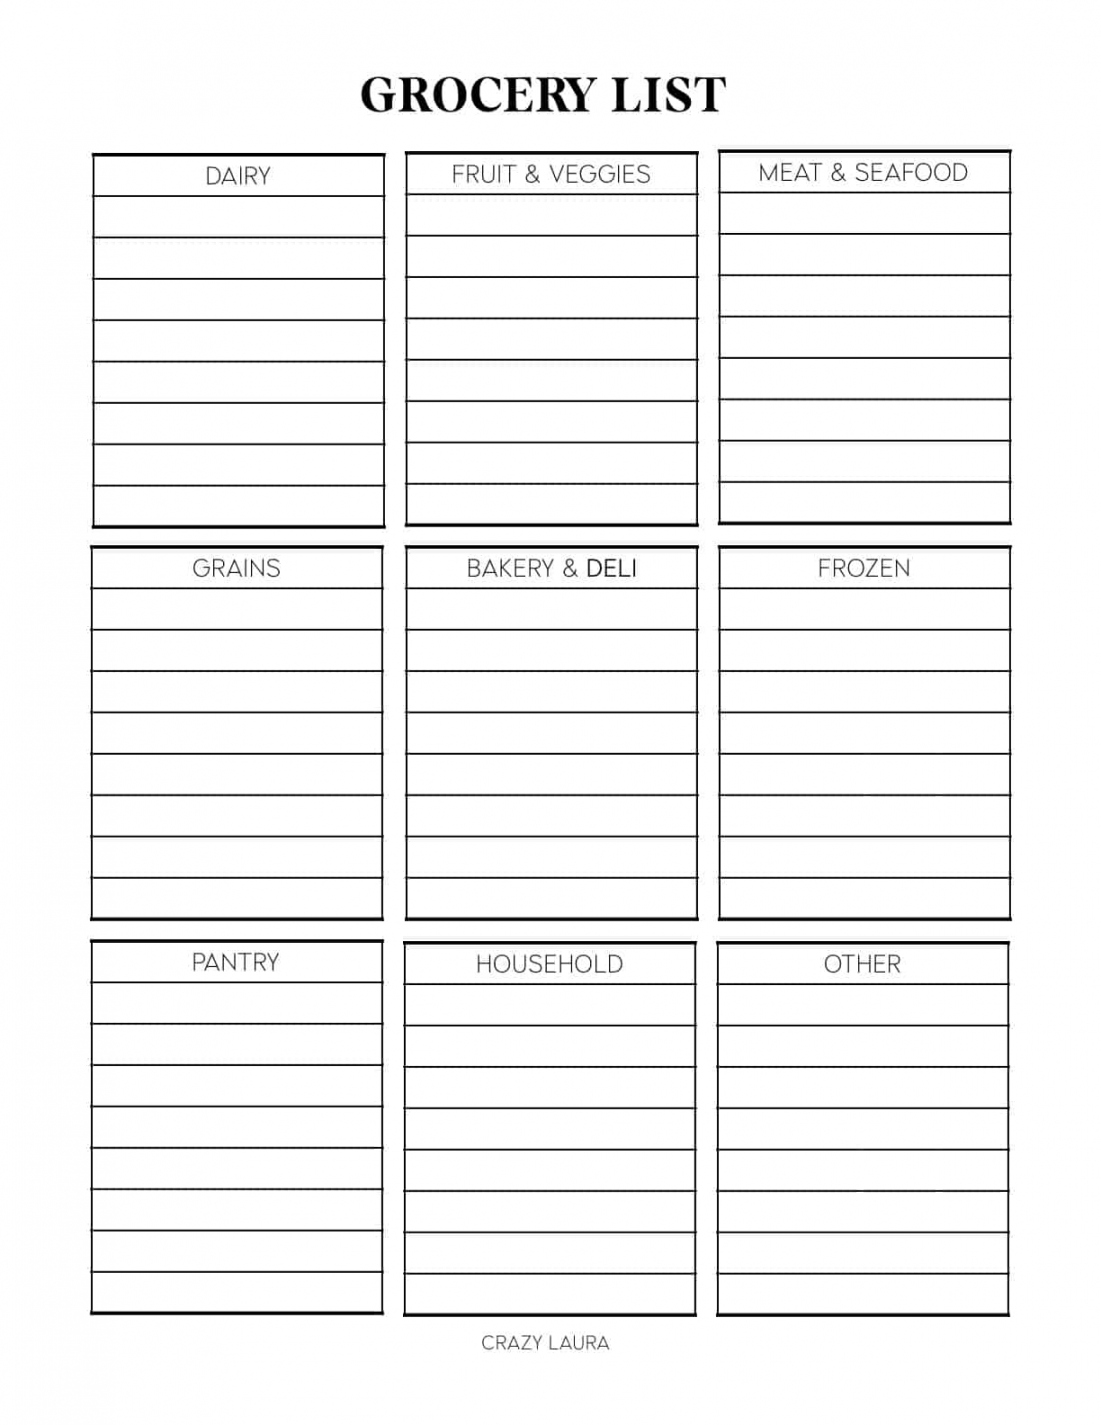 Free Grocery List Printable With Three Versions - Crazy Laura